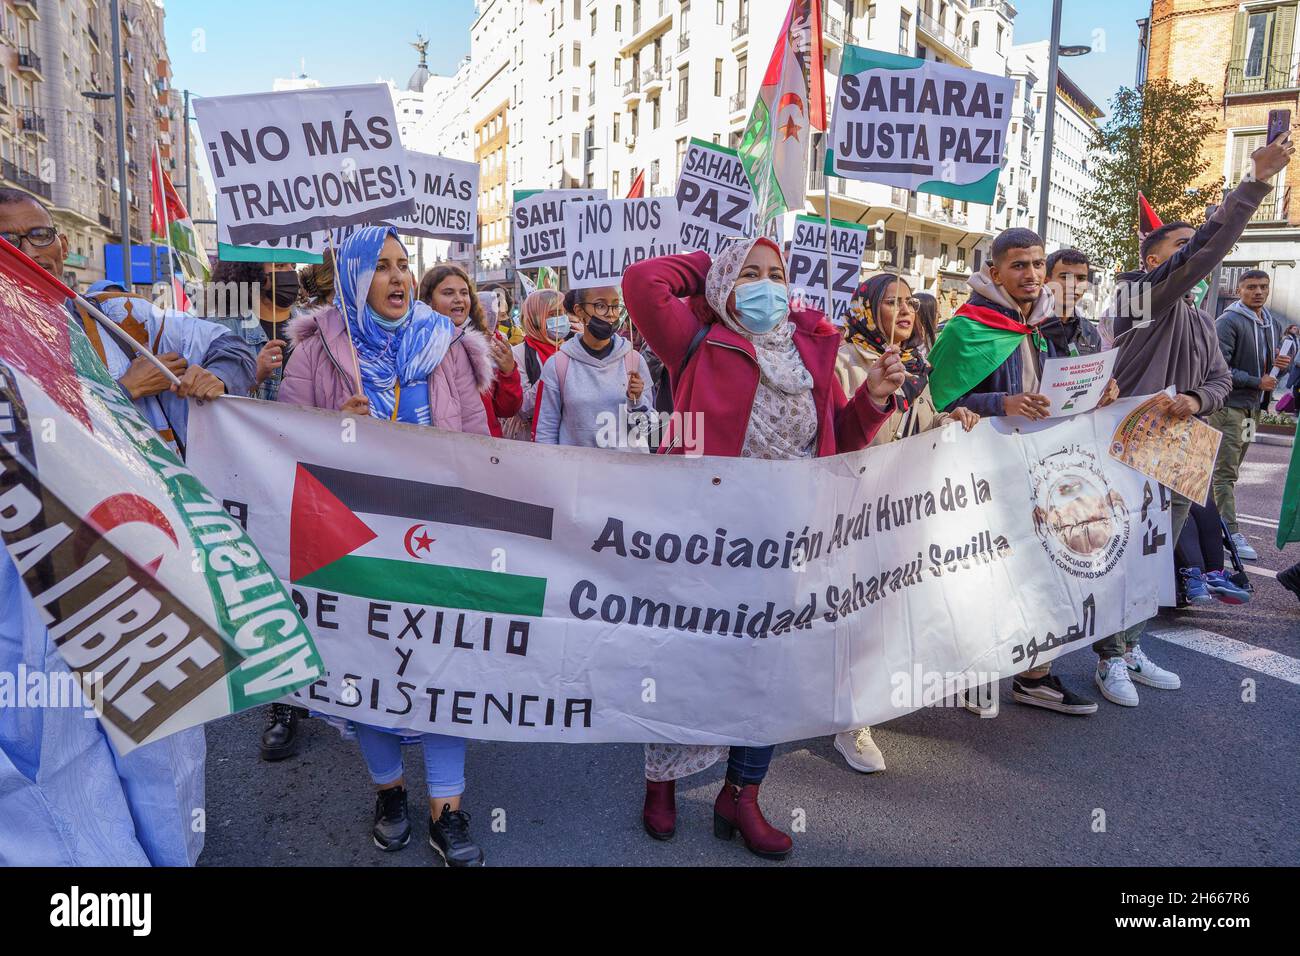 Madrid, Spain. 12th June, 2021. Protesters hold placards and a banner in defense of the Sahrawi people during a demonstration.Activists held a protest against the human rights abuses against the Saharawi people and to call for the ''liberation of Western Sahara'' in Gran Via Street in Madrid, Spain. (Credit Image: © Atilano Garcia/SOPA Images via ZUMA Press Wire) Stock Photo